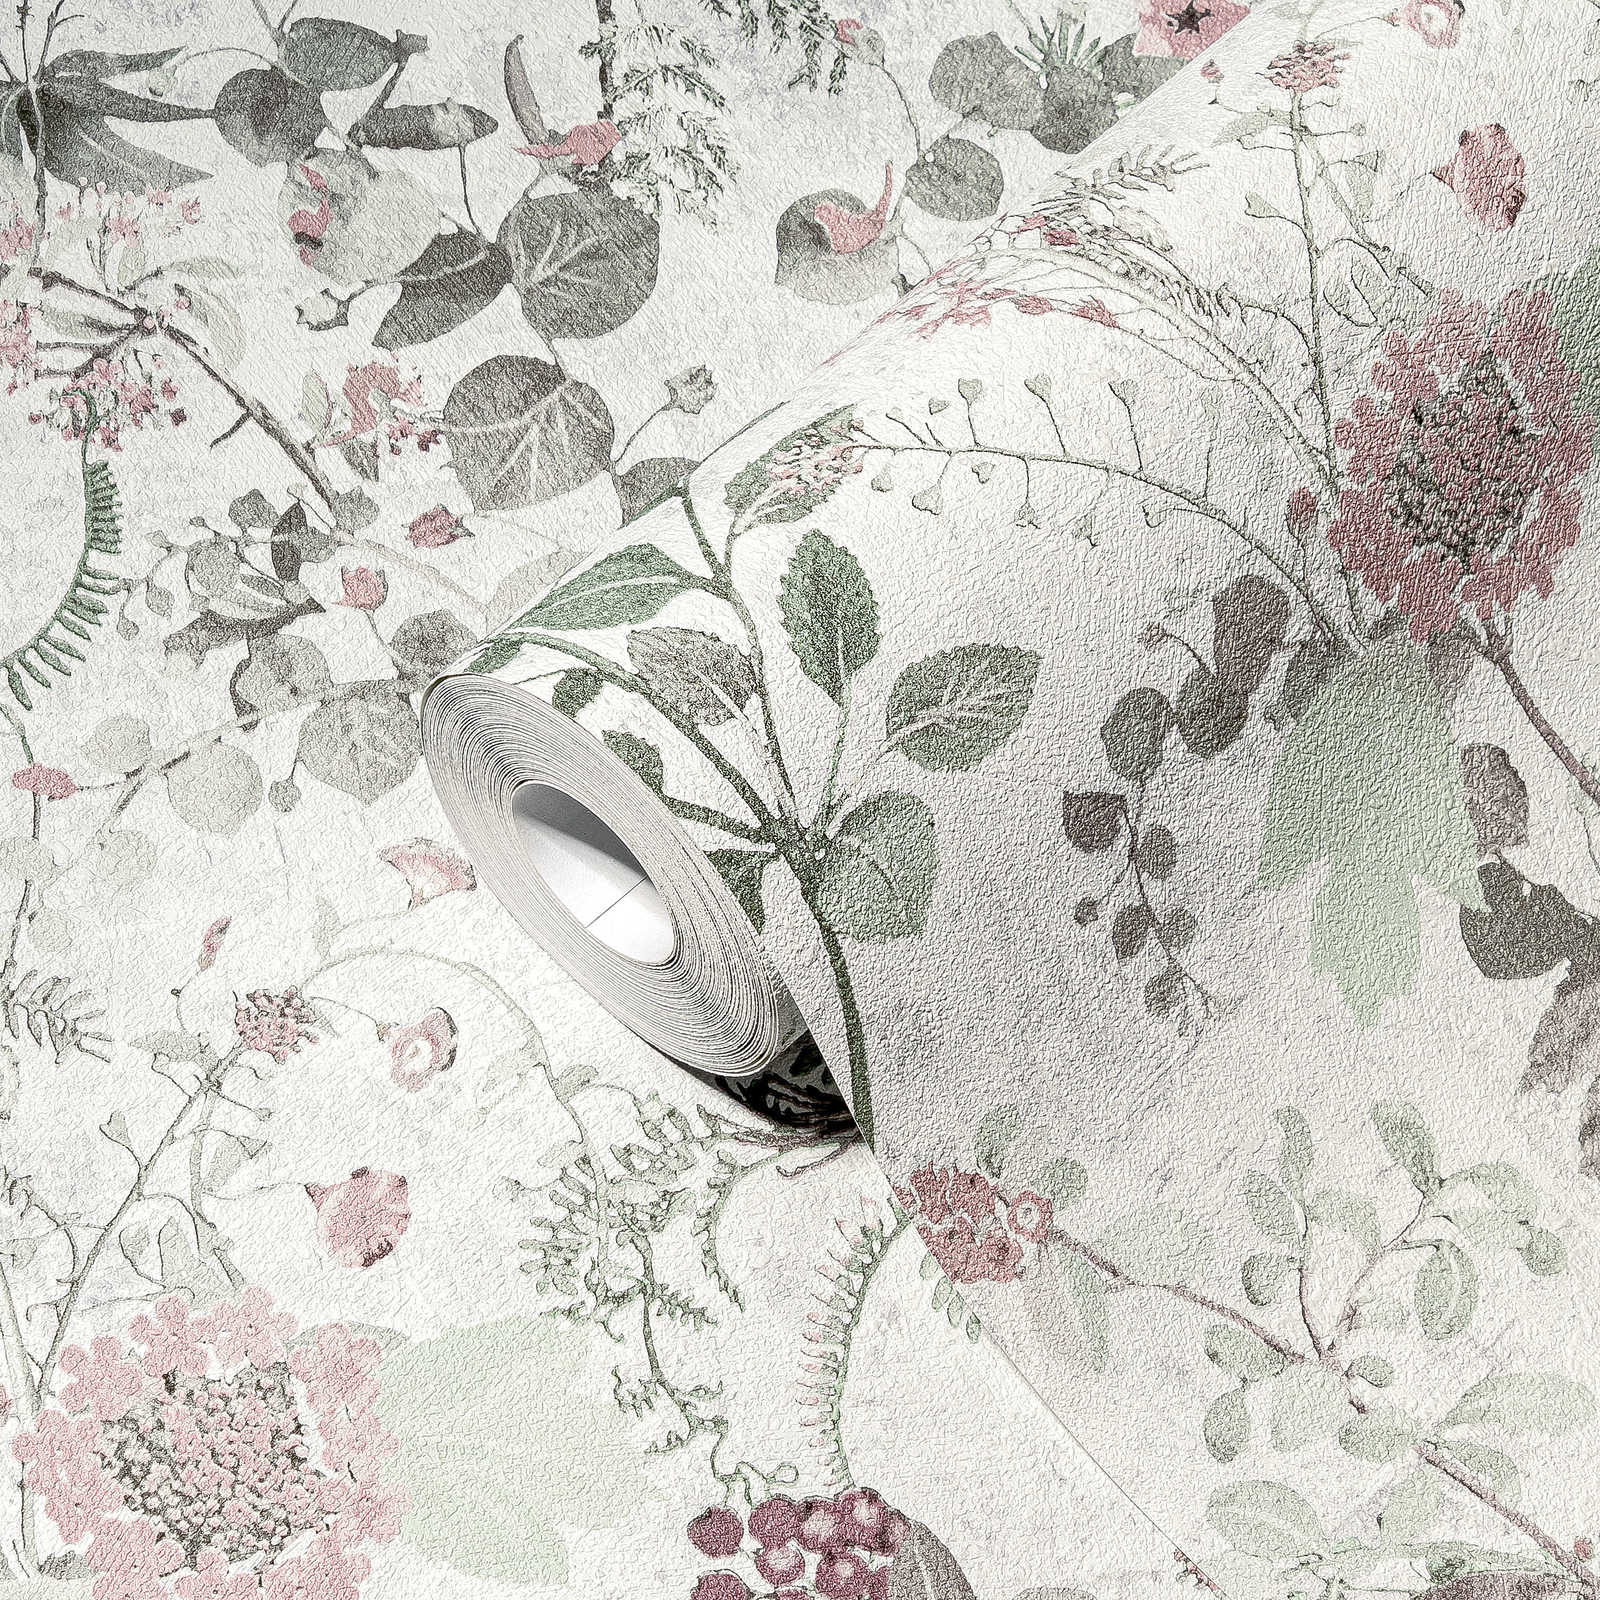             Nature wallpaper with floral pattern - grey, green, pink
        